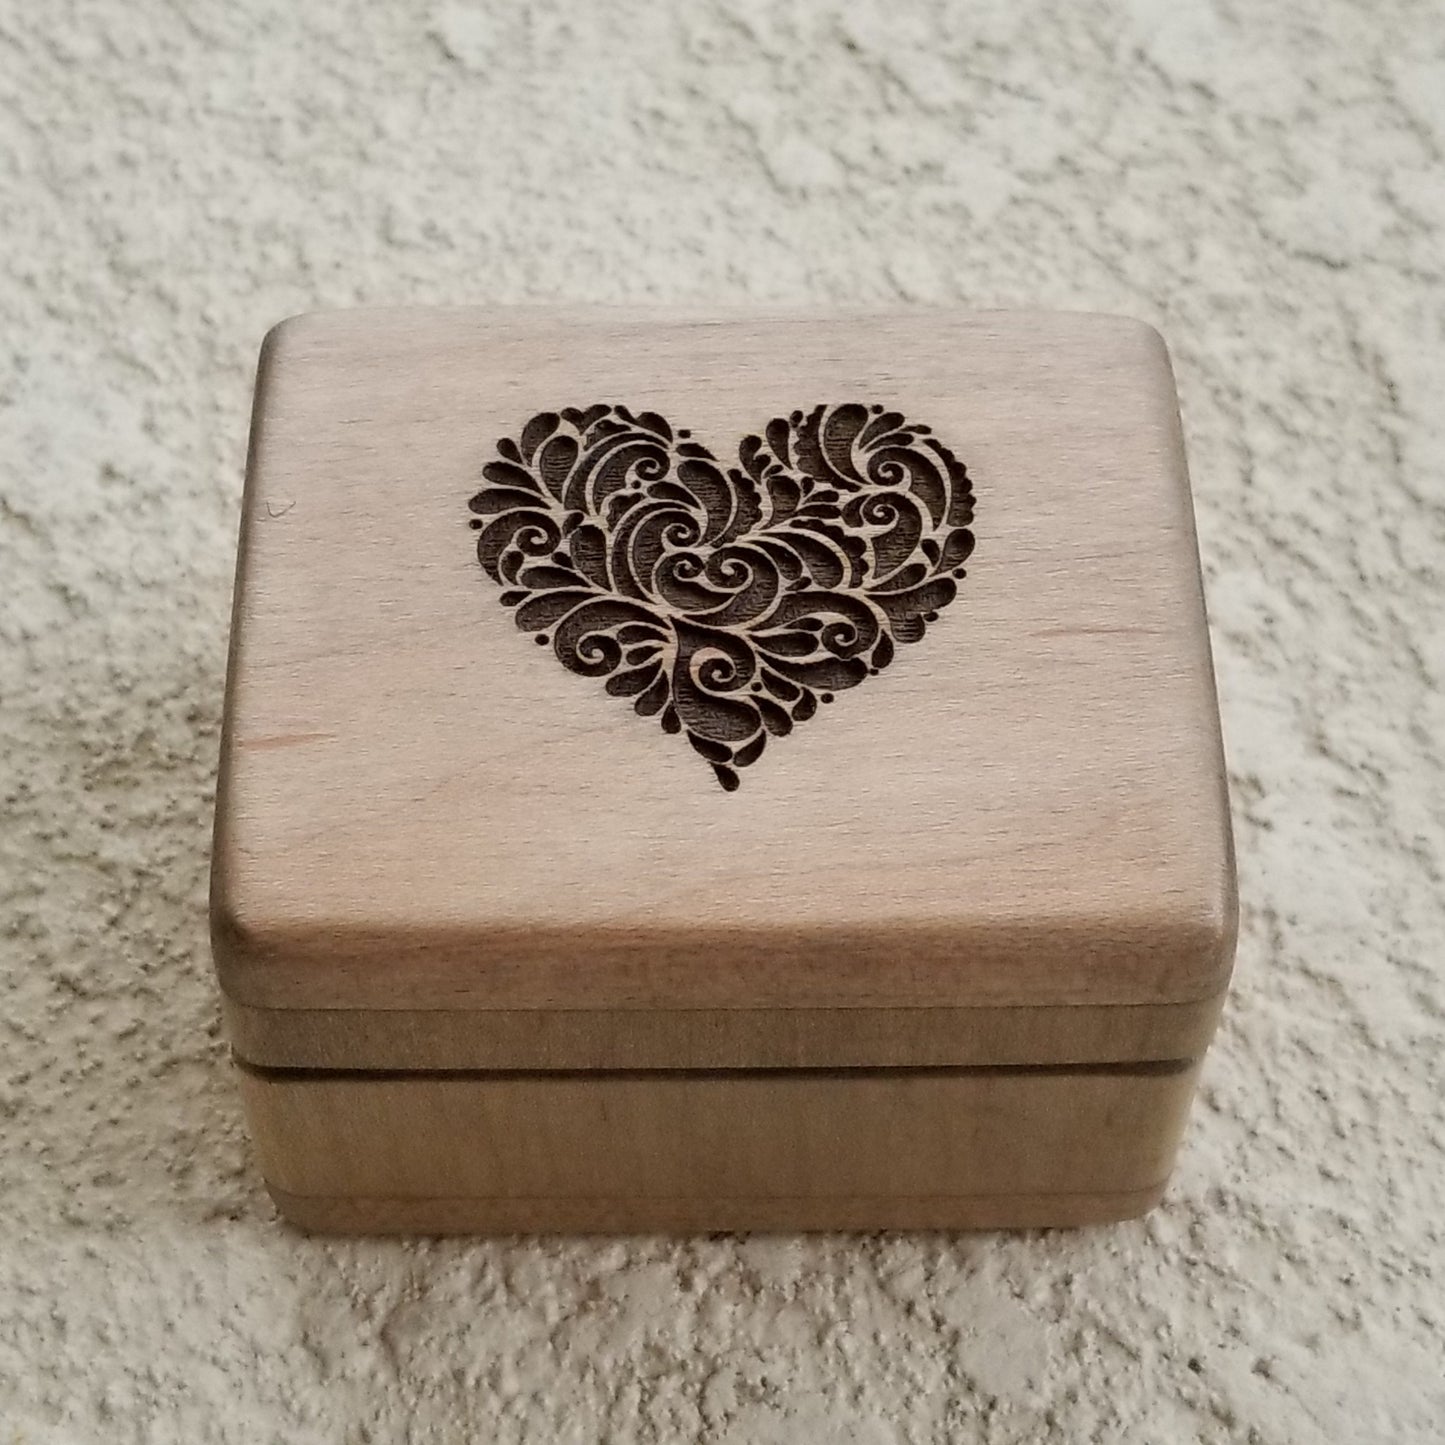 heart box, engagement box heart engraved on top